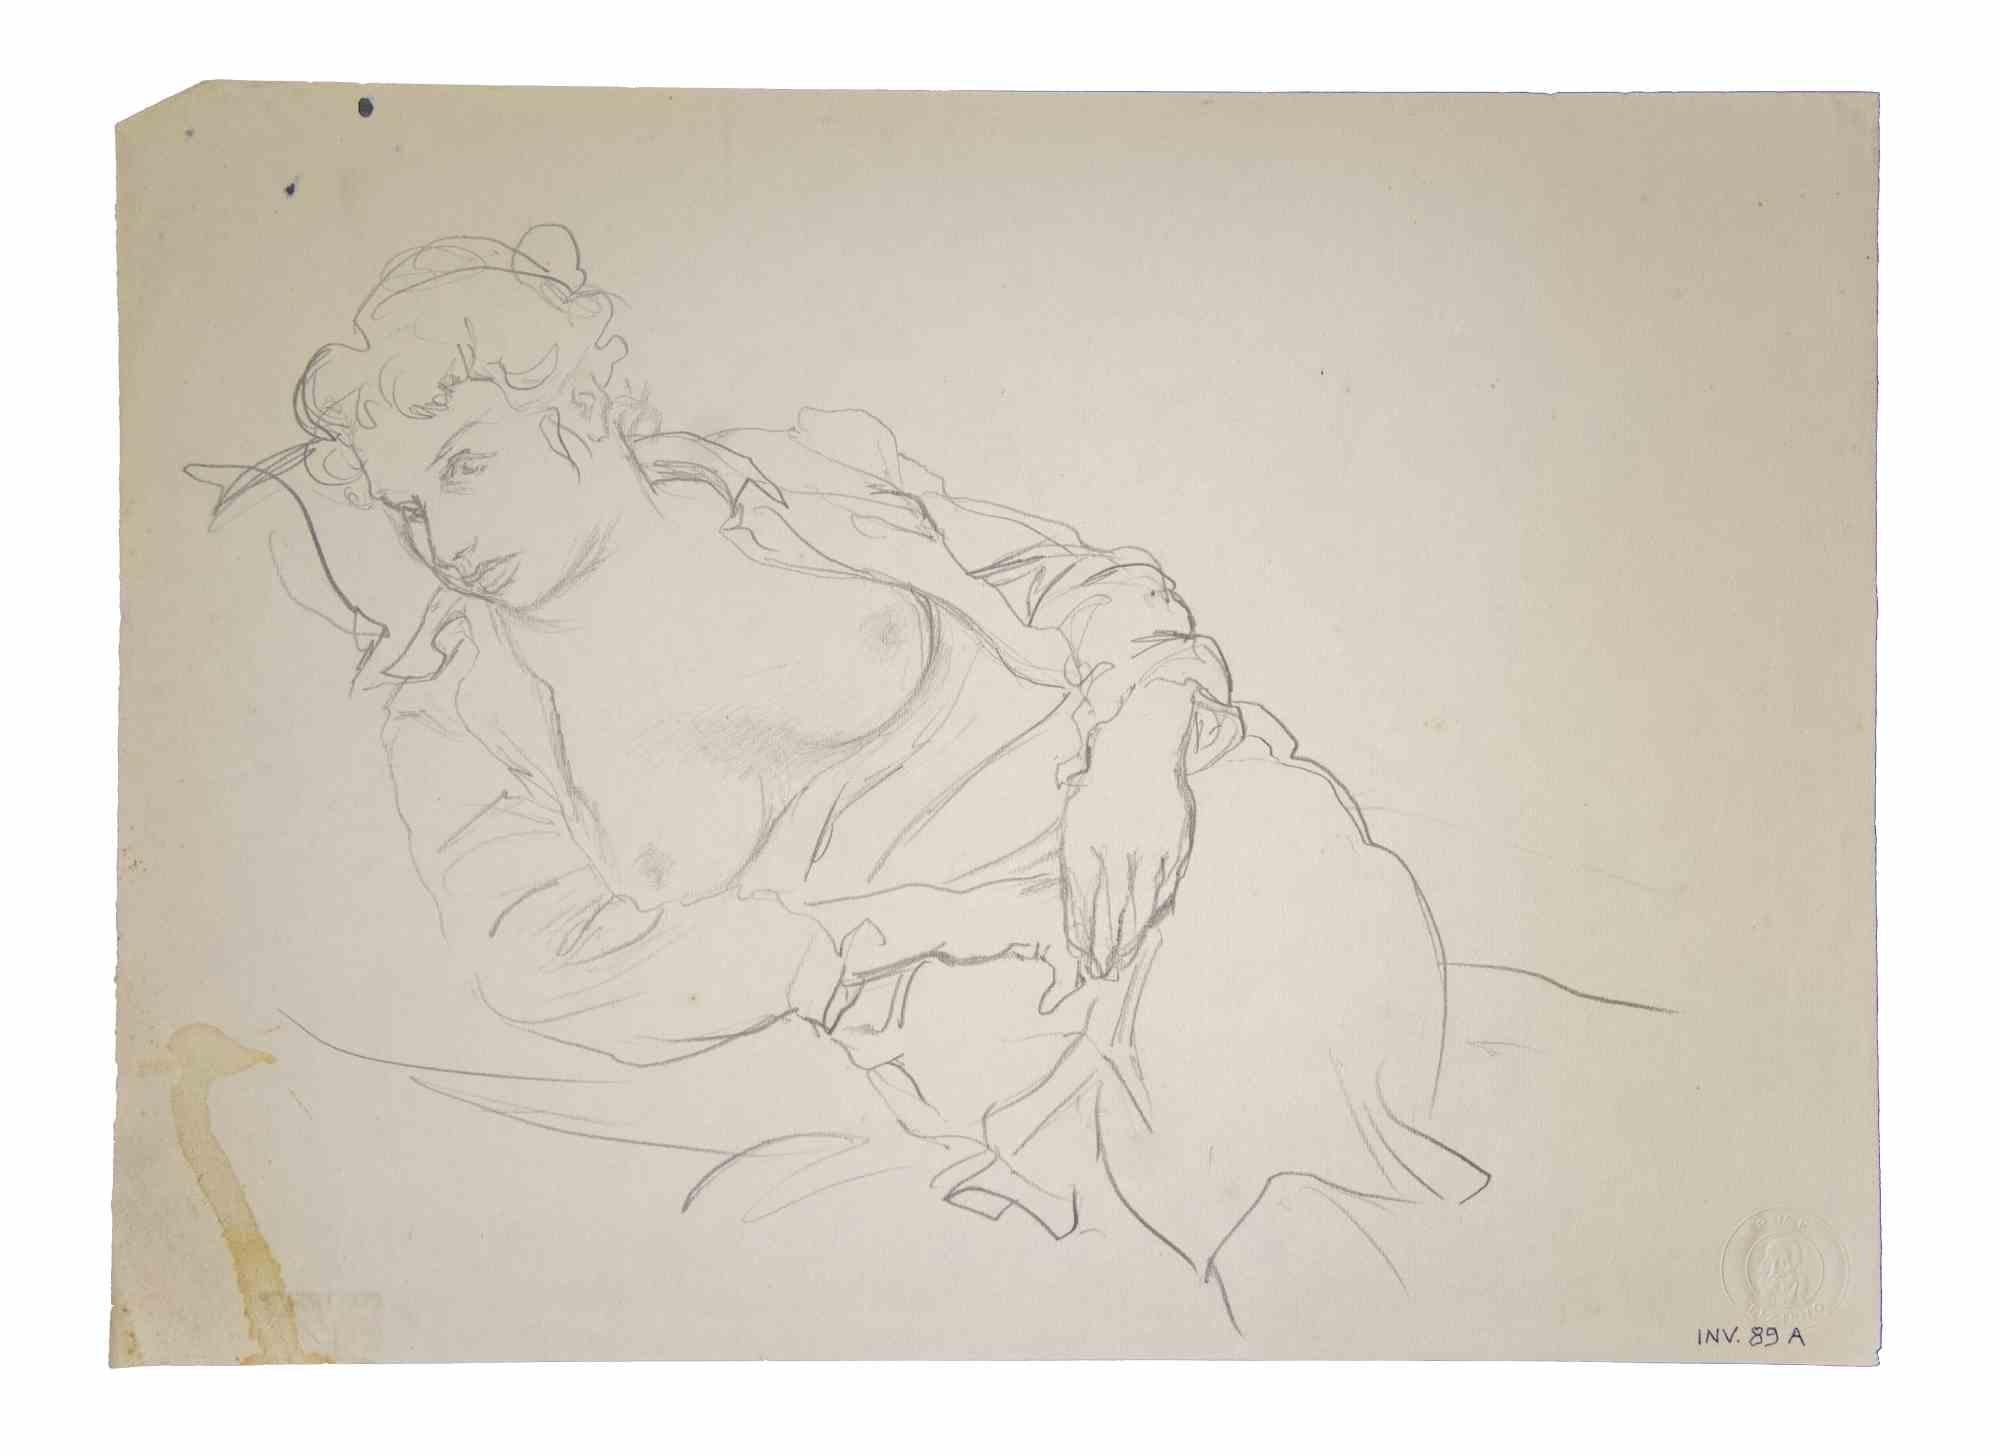 Reclined Figure is an original artwork realized in the 1970s by the Italian Contemporary artist  Leo Guida  (1992 - 2017).

Original drawings in pencil on paper.

Good conditions but aged.

The artwork is depicted through strong strokes in